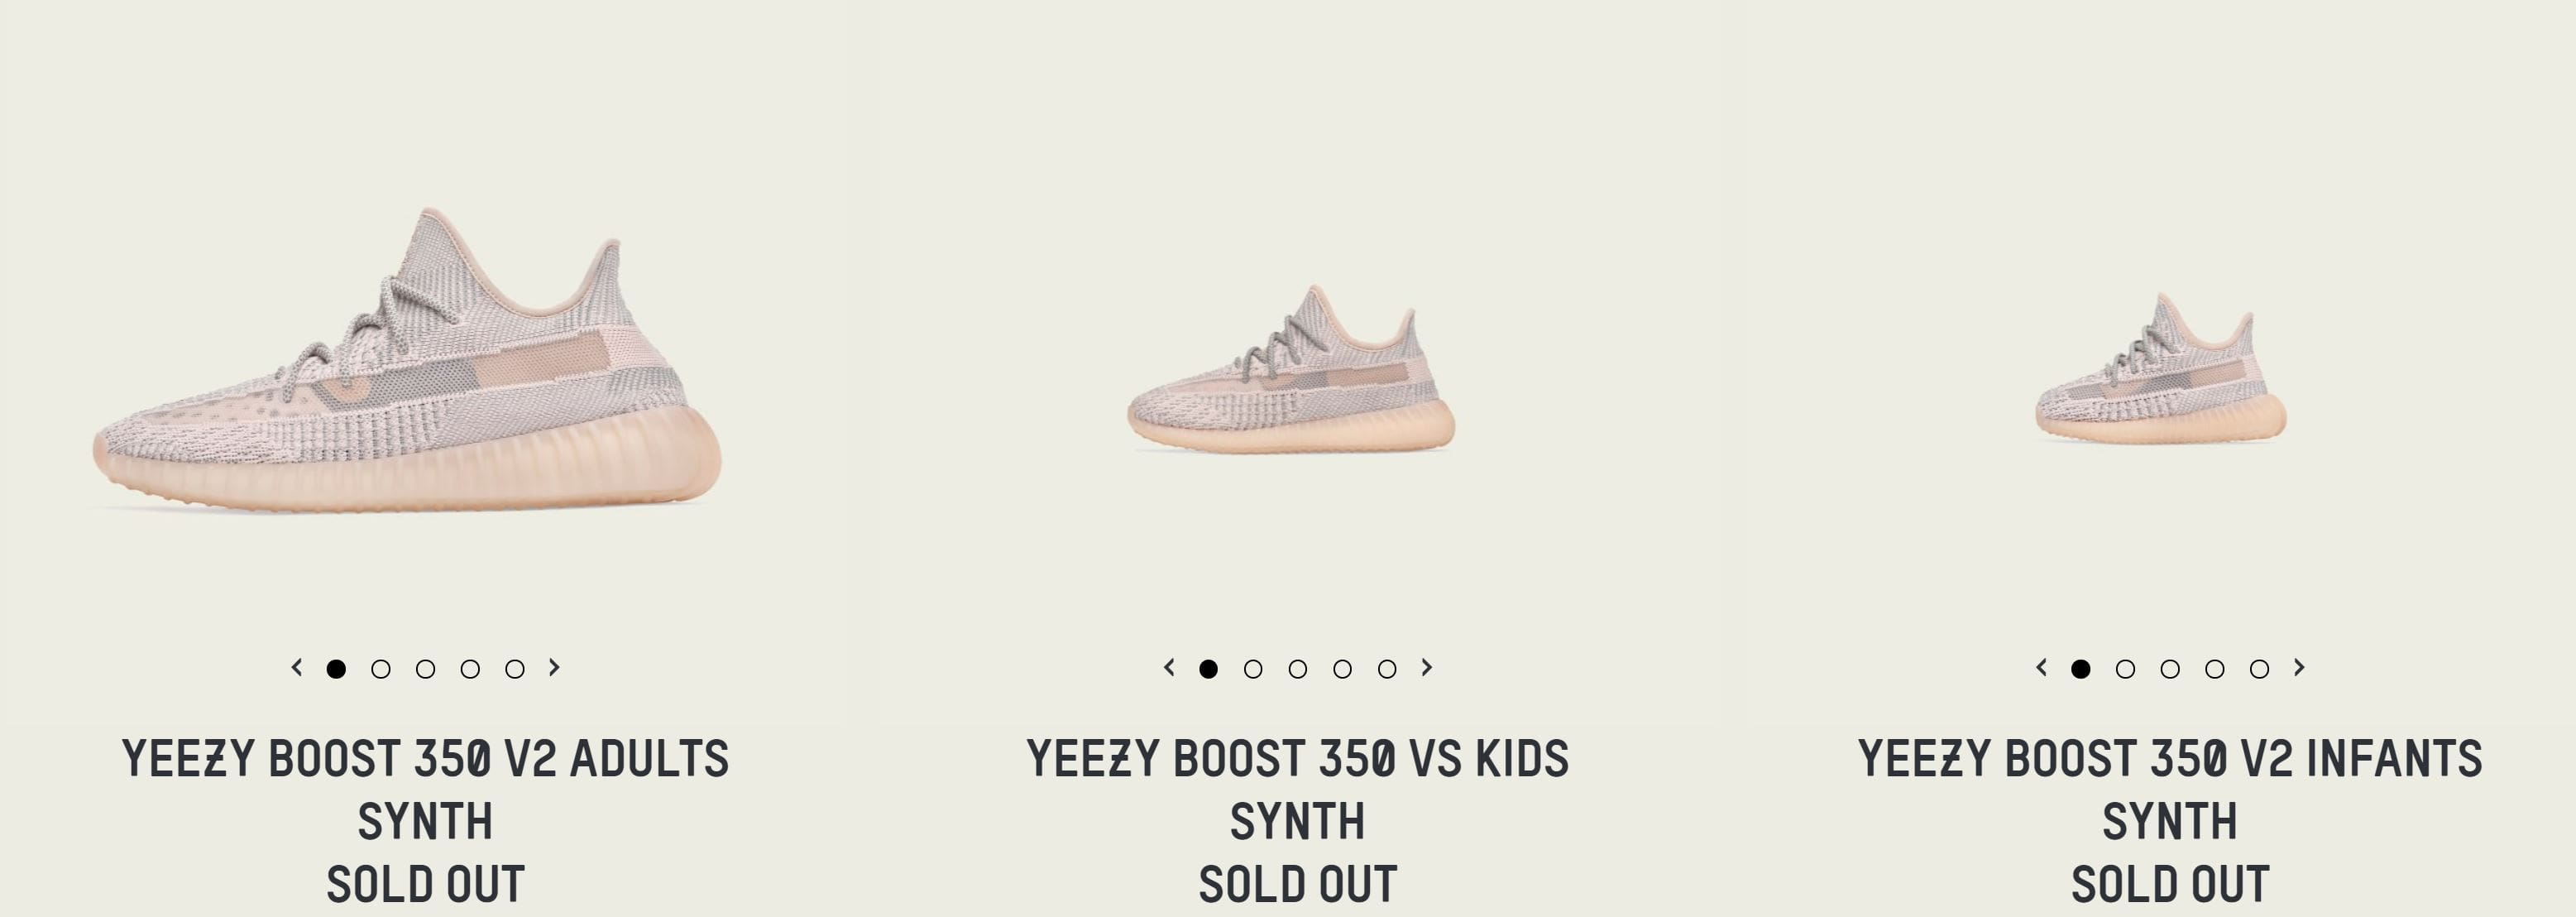 which store sells yeezys